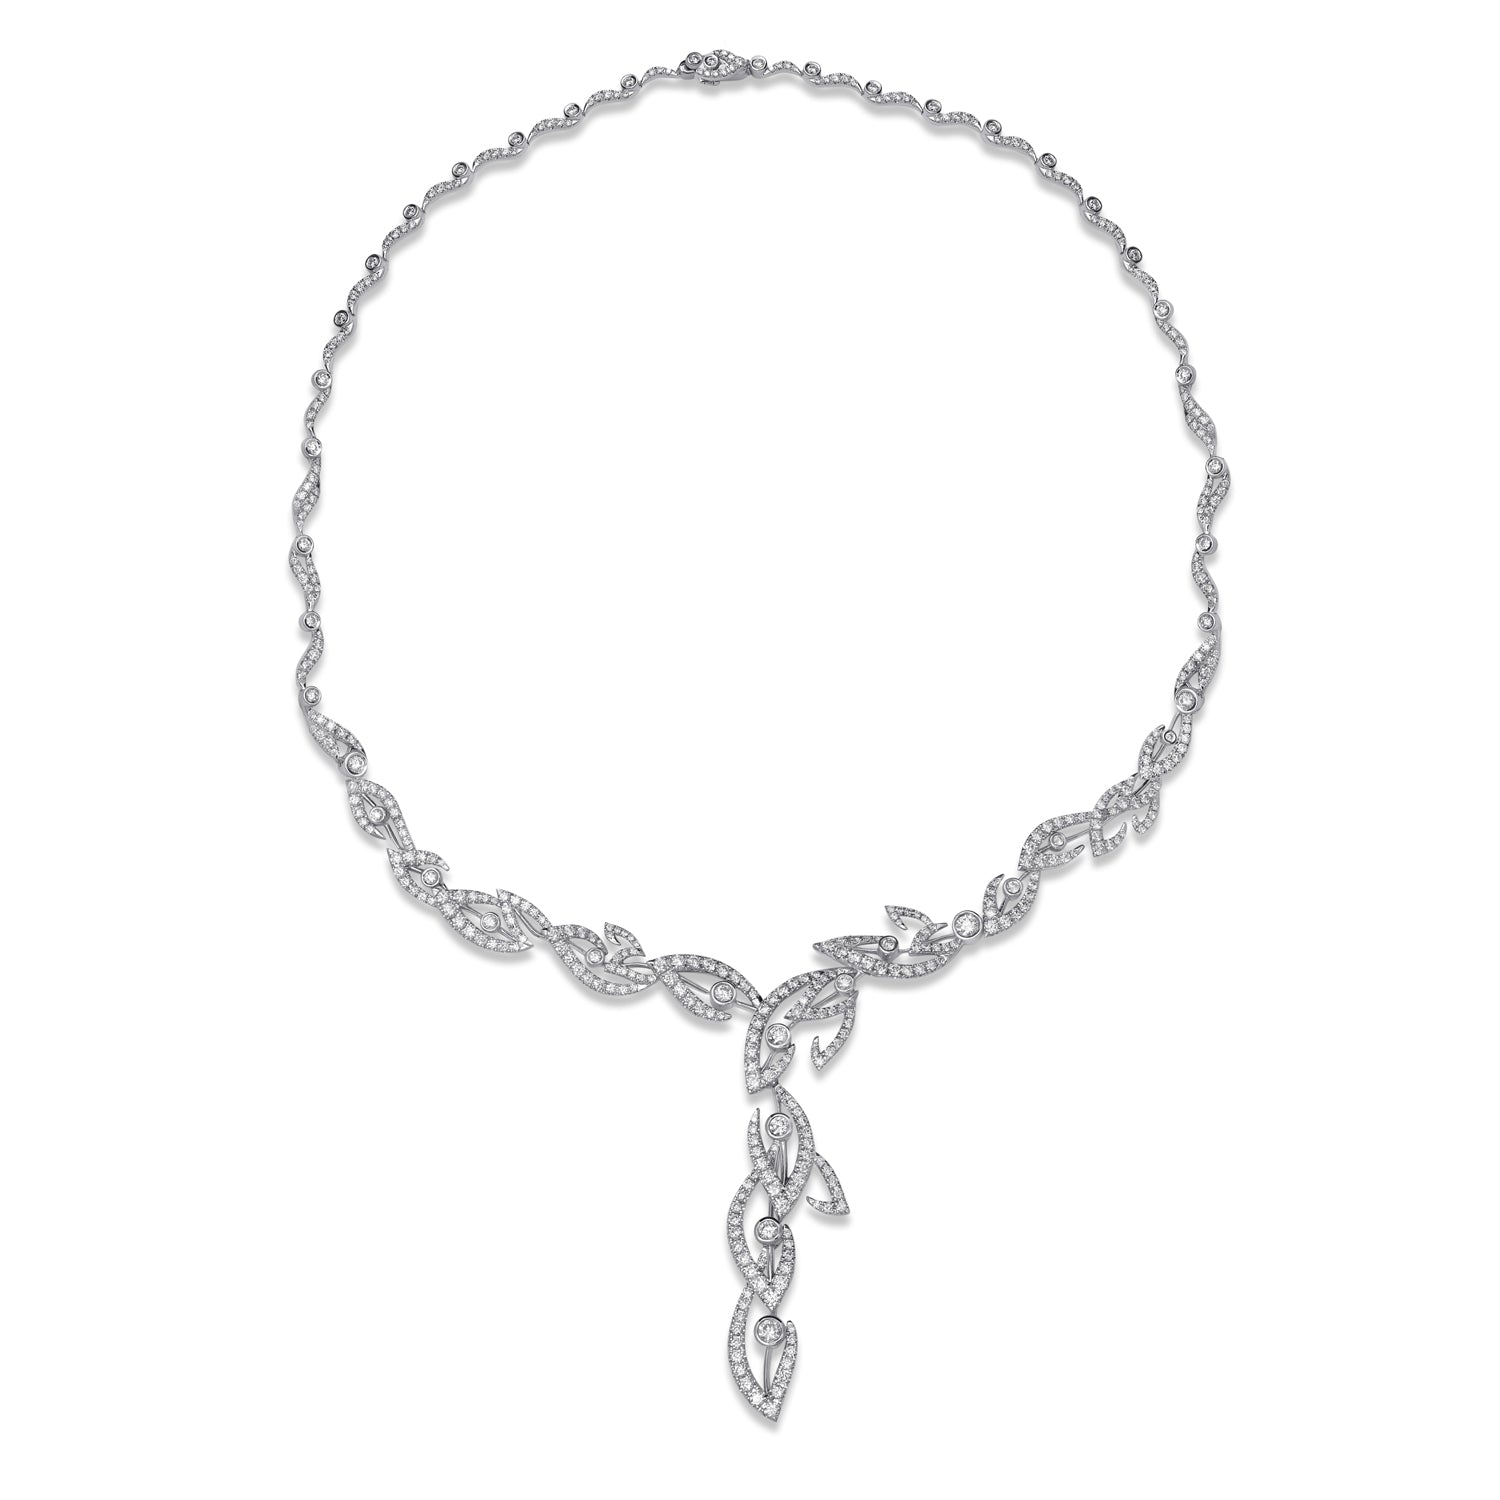 filigree diamond necklace with leaf desingn and detachable pendant made of 18k white gold, Stenzhorn Jewellery